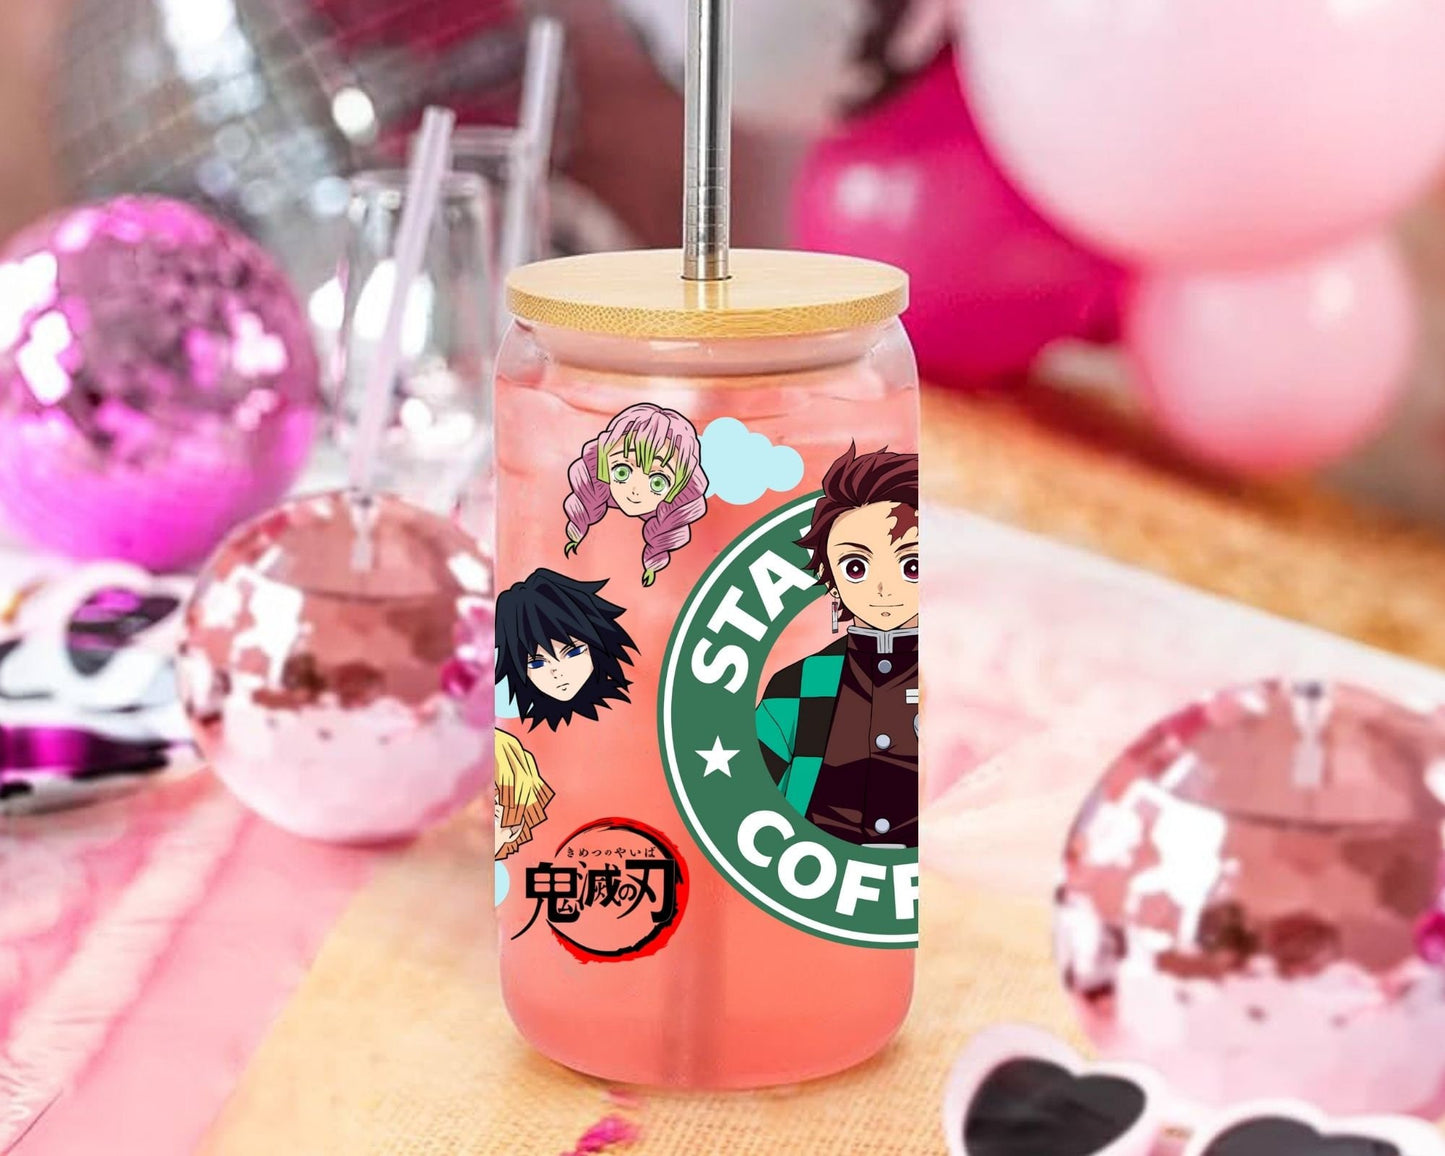 UVDTF Demon Anime Cup Wrap, Ready to Use Glass Cup UVDTF transfers for Glass Can | Ready to Apply UVDTF wraps for Libbey Glass